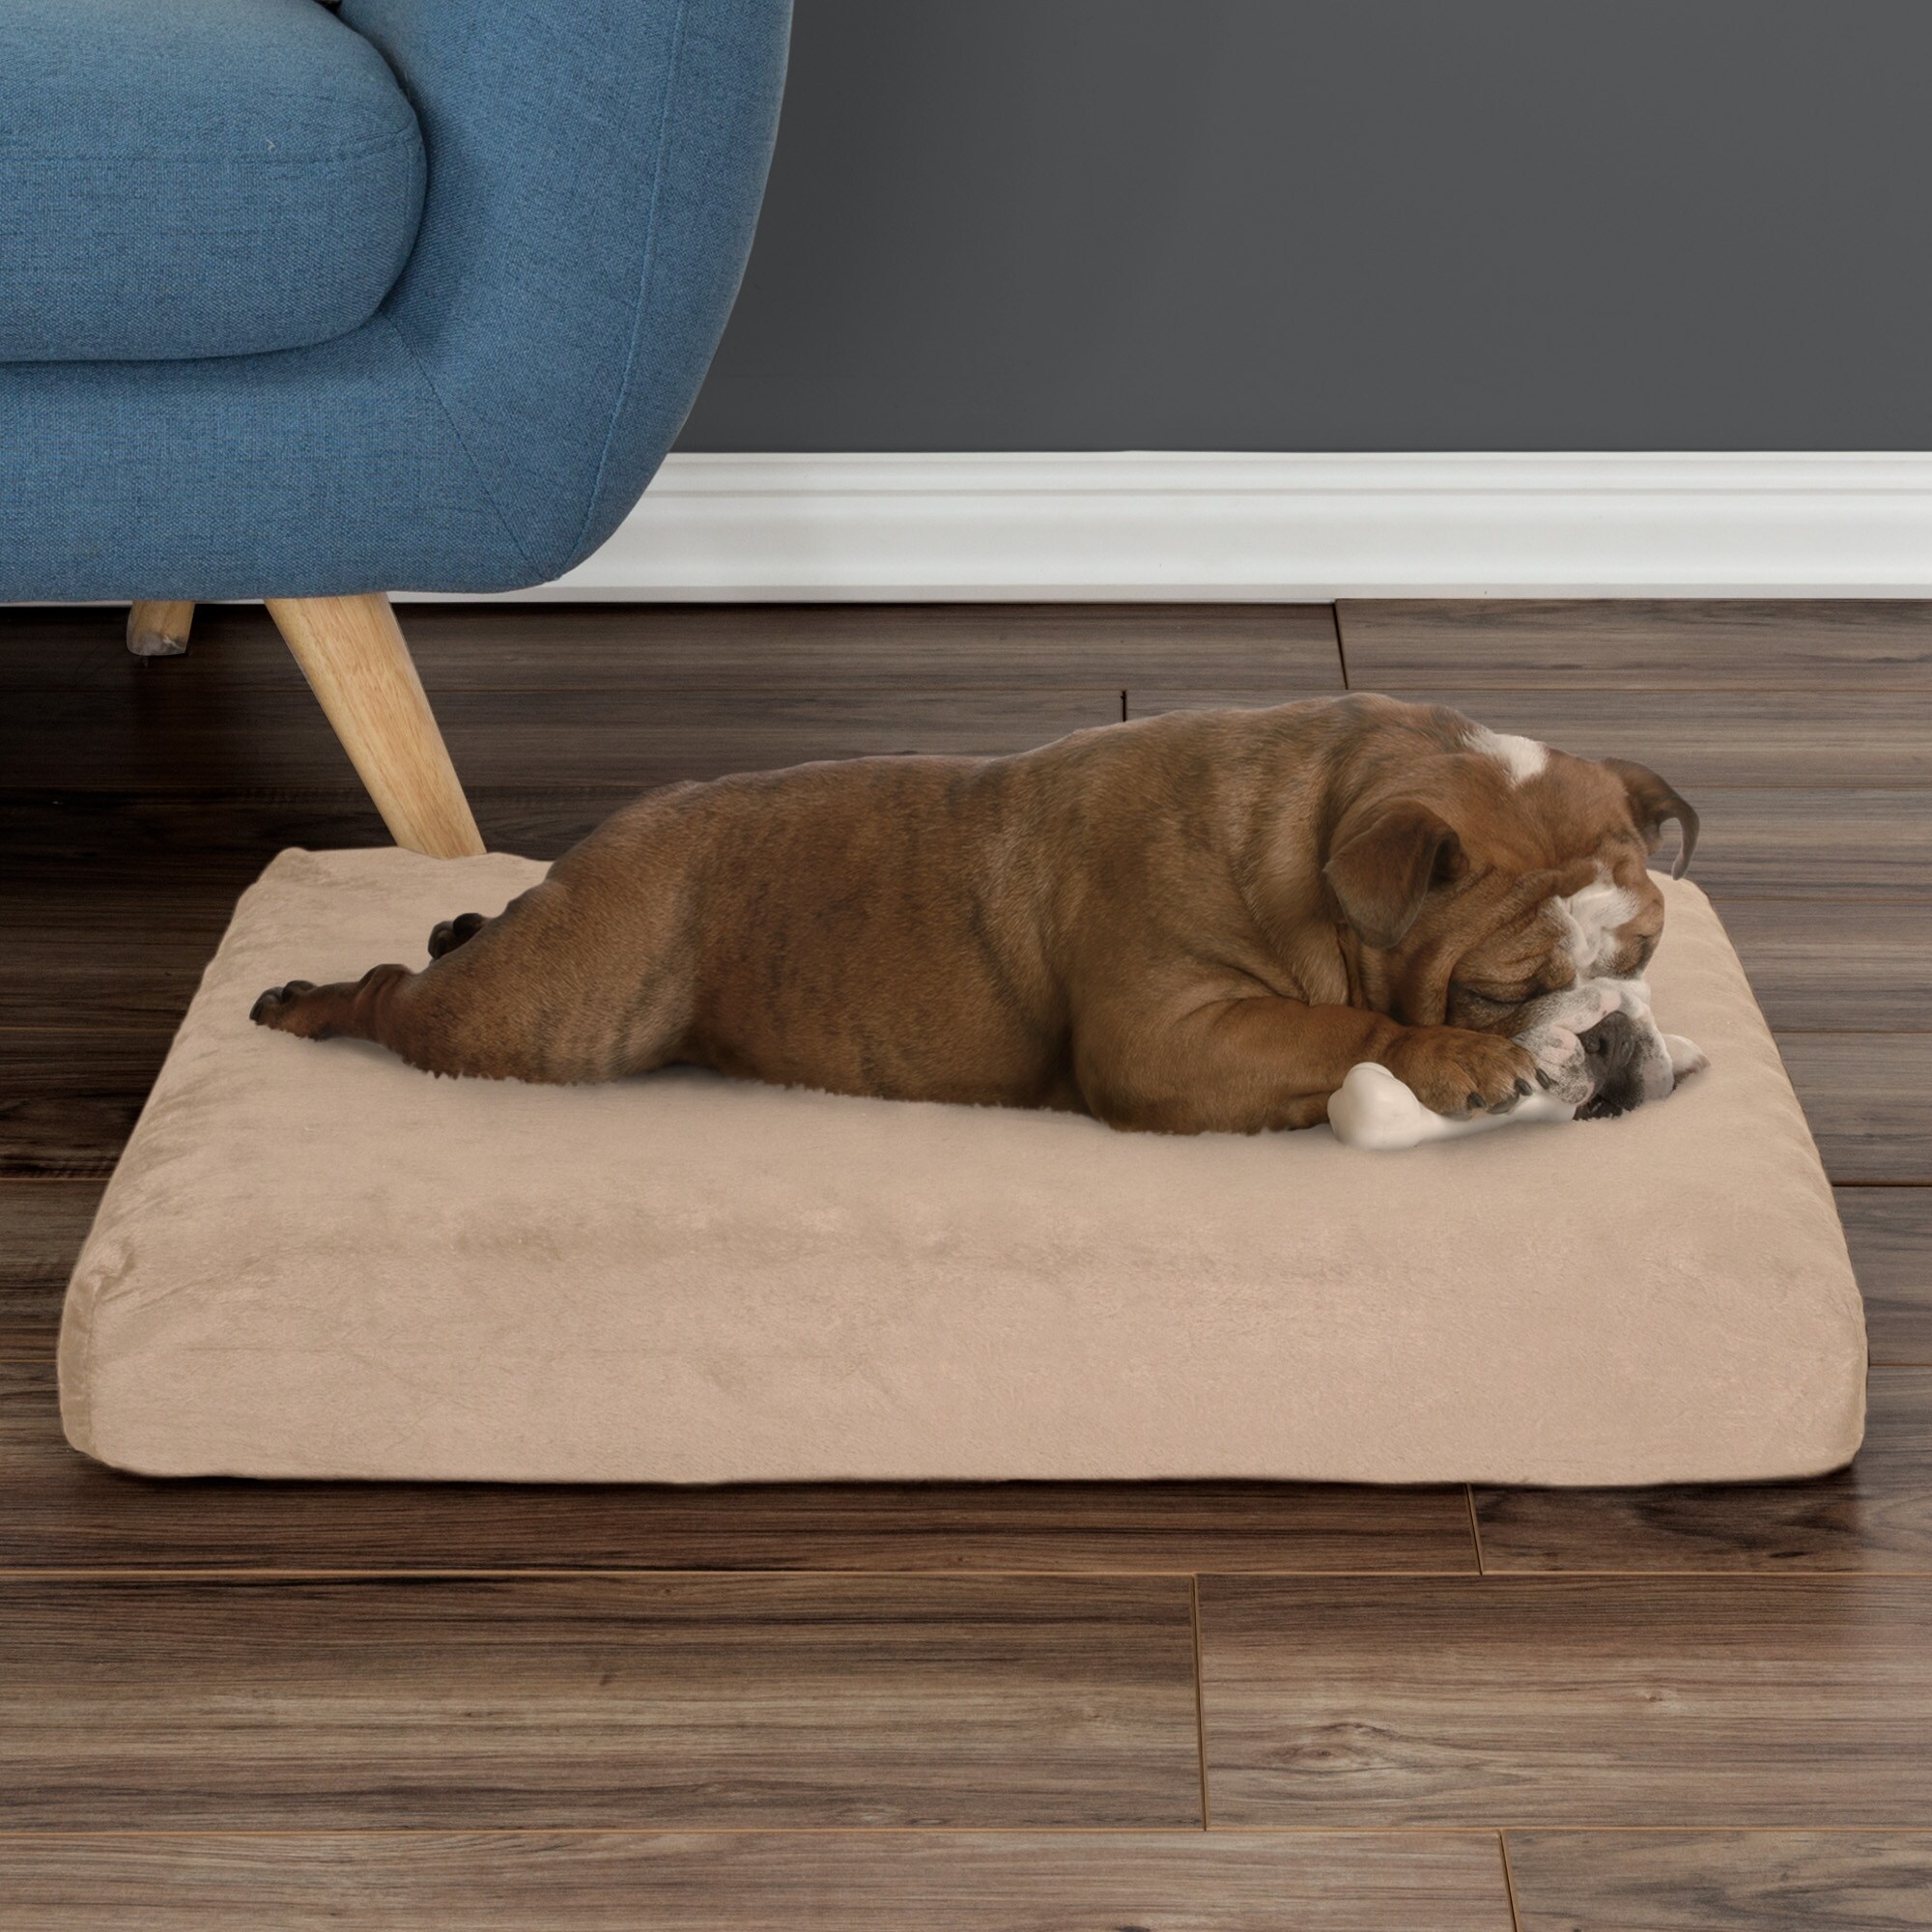 https://ak1.ostkcdn.com/images/products/is/images/direct/6ce207826d17cf5f753c1c22b185186419c433da/Petmaker-2-Layer-Orthopedic-Memory-Foam-Dog-Pet-Bed-with-Machine-Washable-Cover.jpg